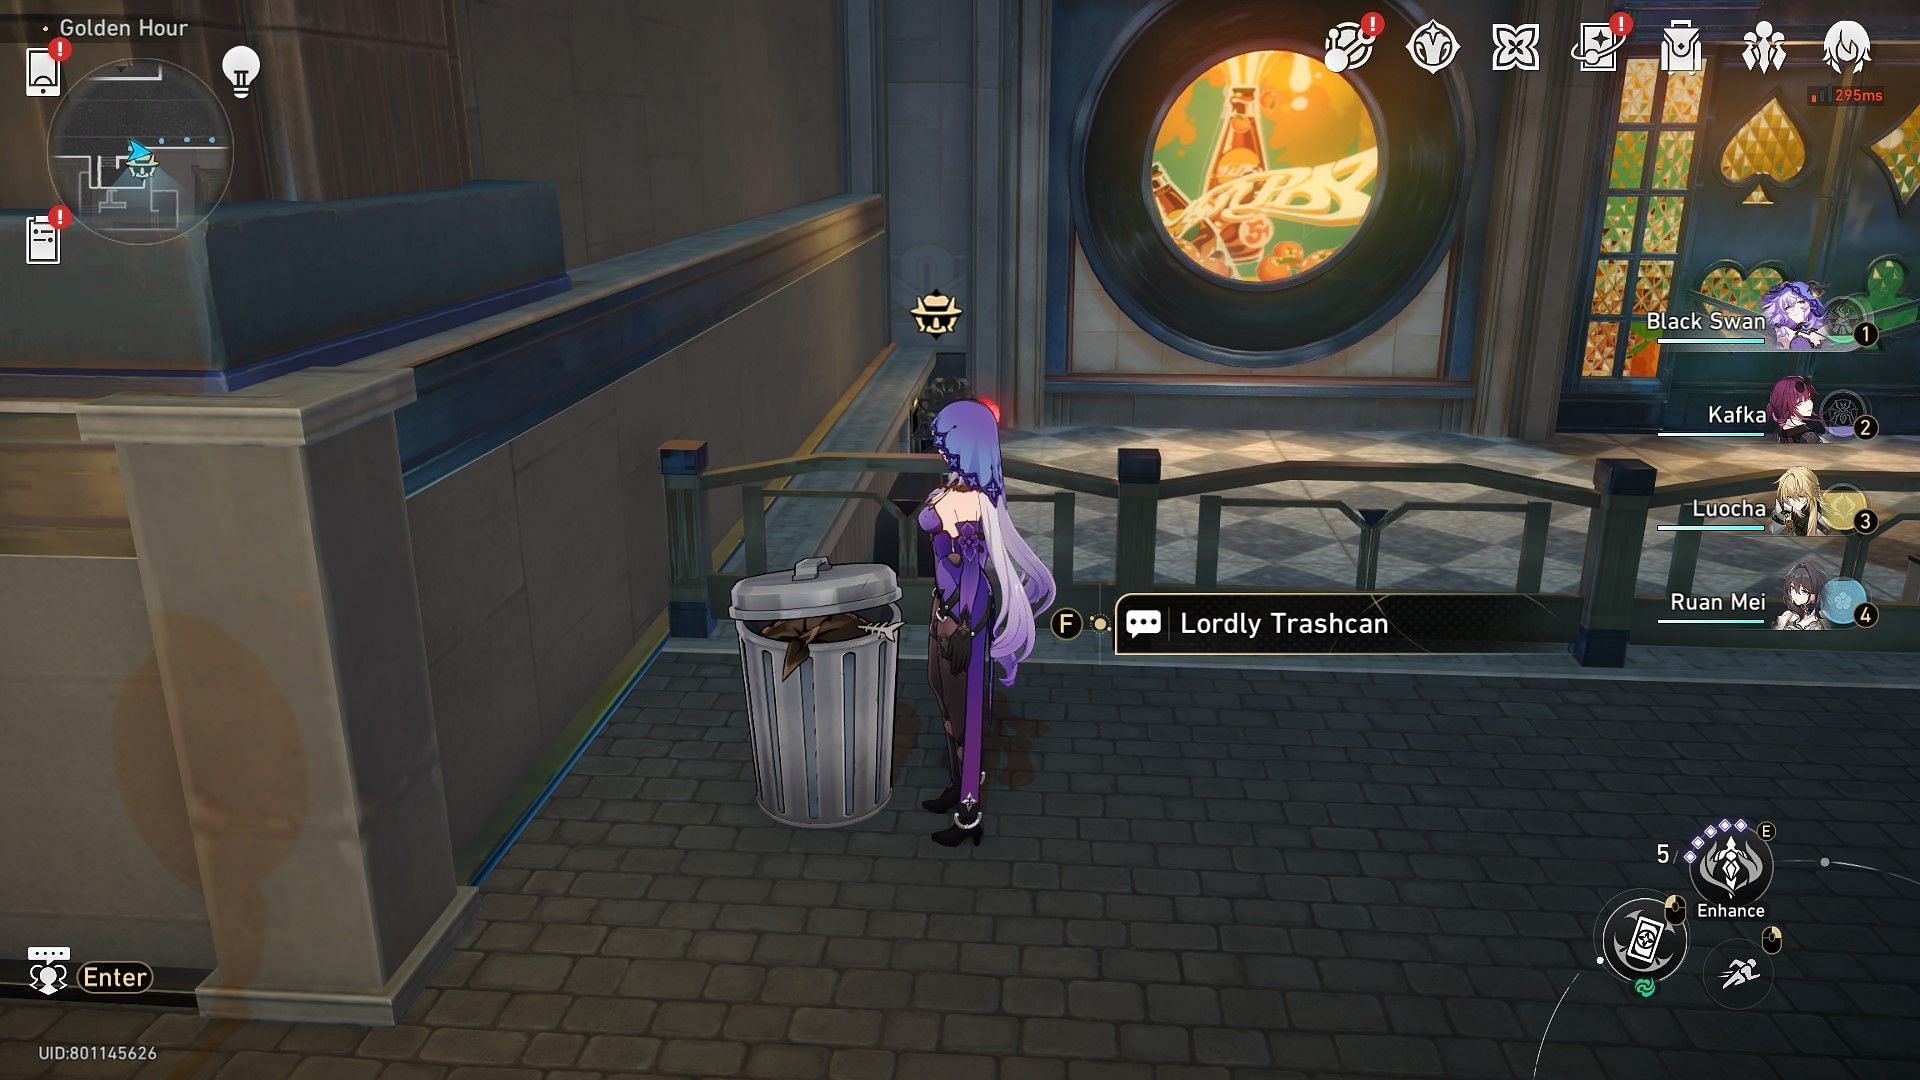 Lordly Trashcans are almost identical to normal ones (Image via Hoyoverse)